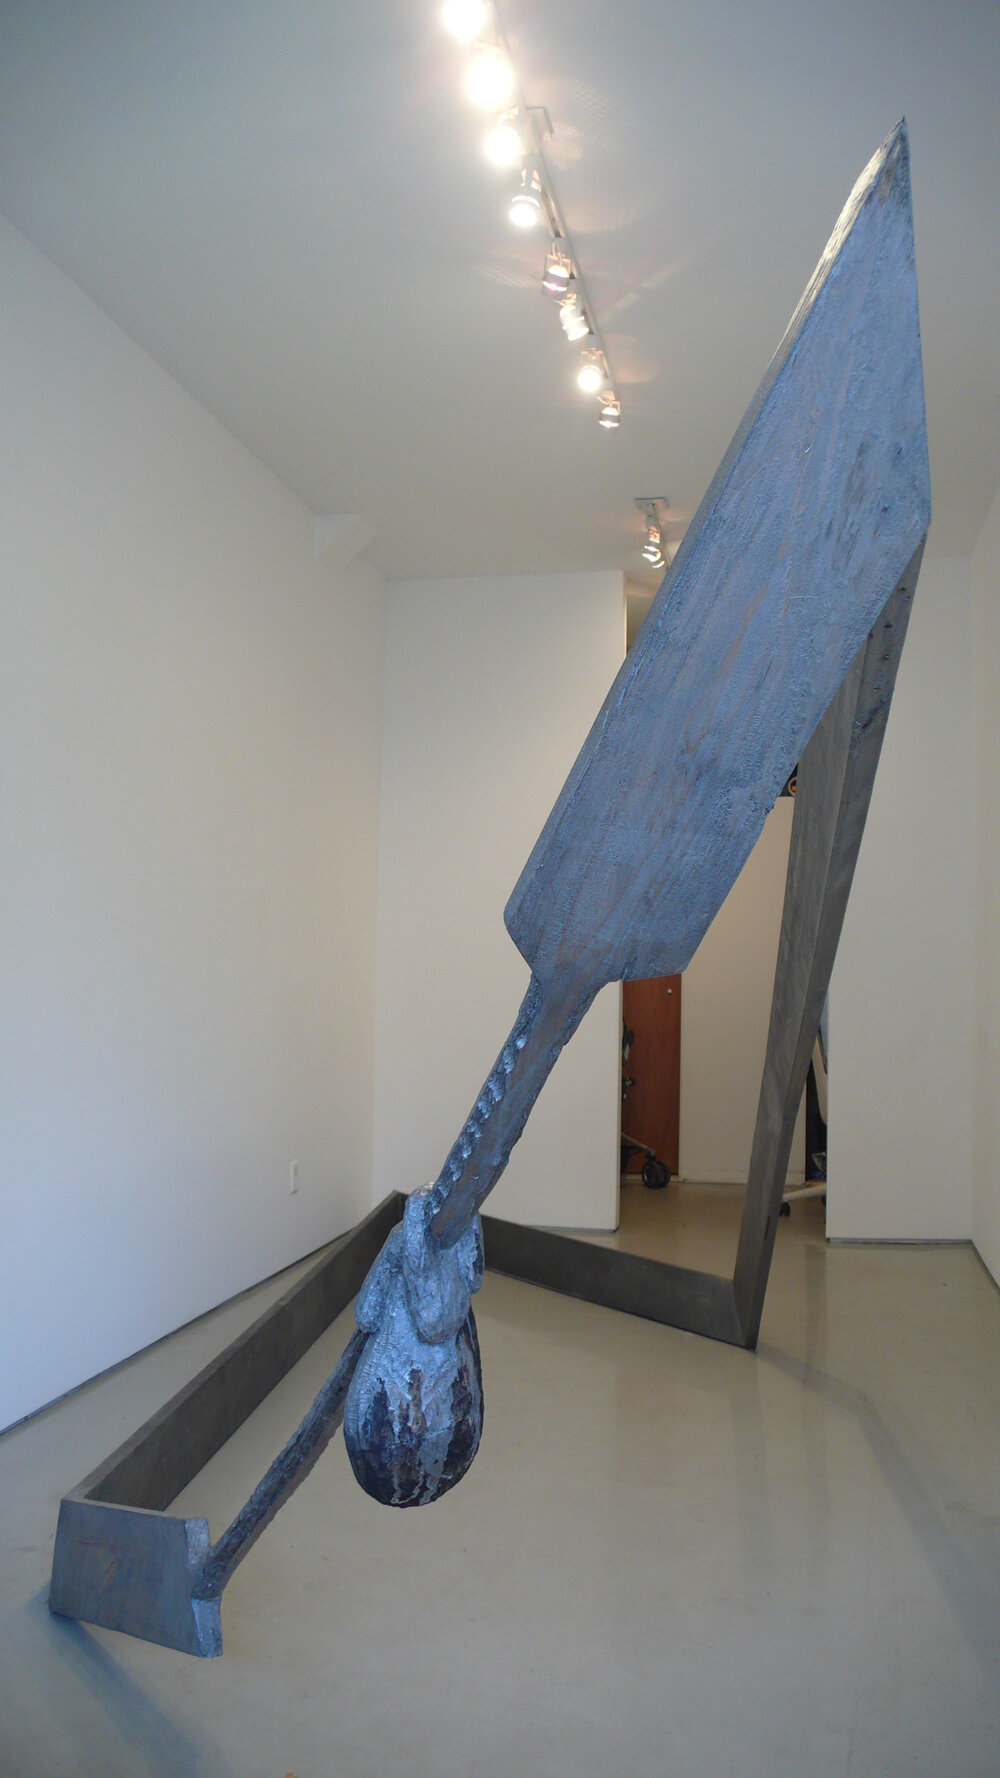 Installation image from the 2009 Gereon Krebber exhibition, Boards with Bumps, at Cindy Rucker Gallery, Number 35